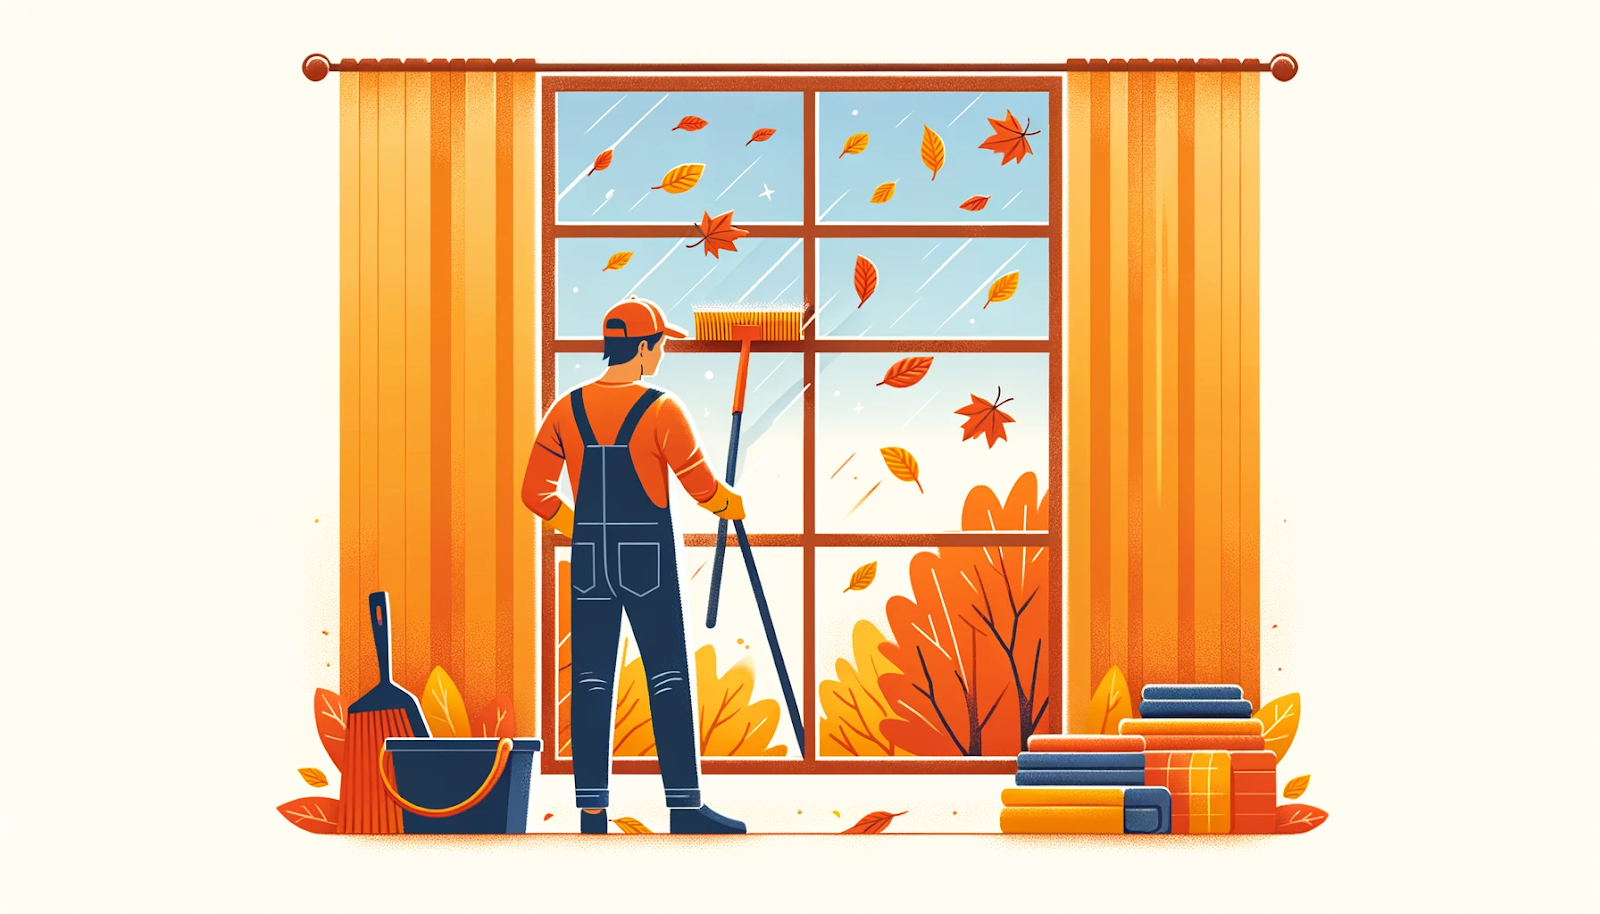 Illustration of window cleaning in fall. The image shows a person cleaning windows with falling leaves and mild weather in the background. The color scheme includes warm autumnal hues to represent the fall season.